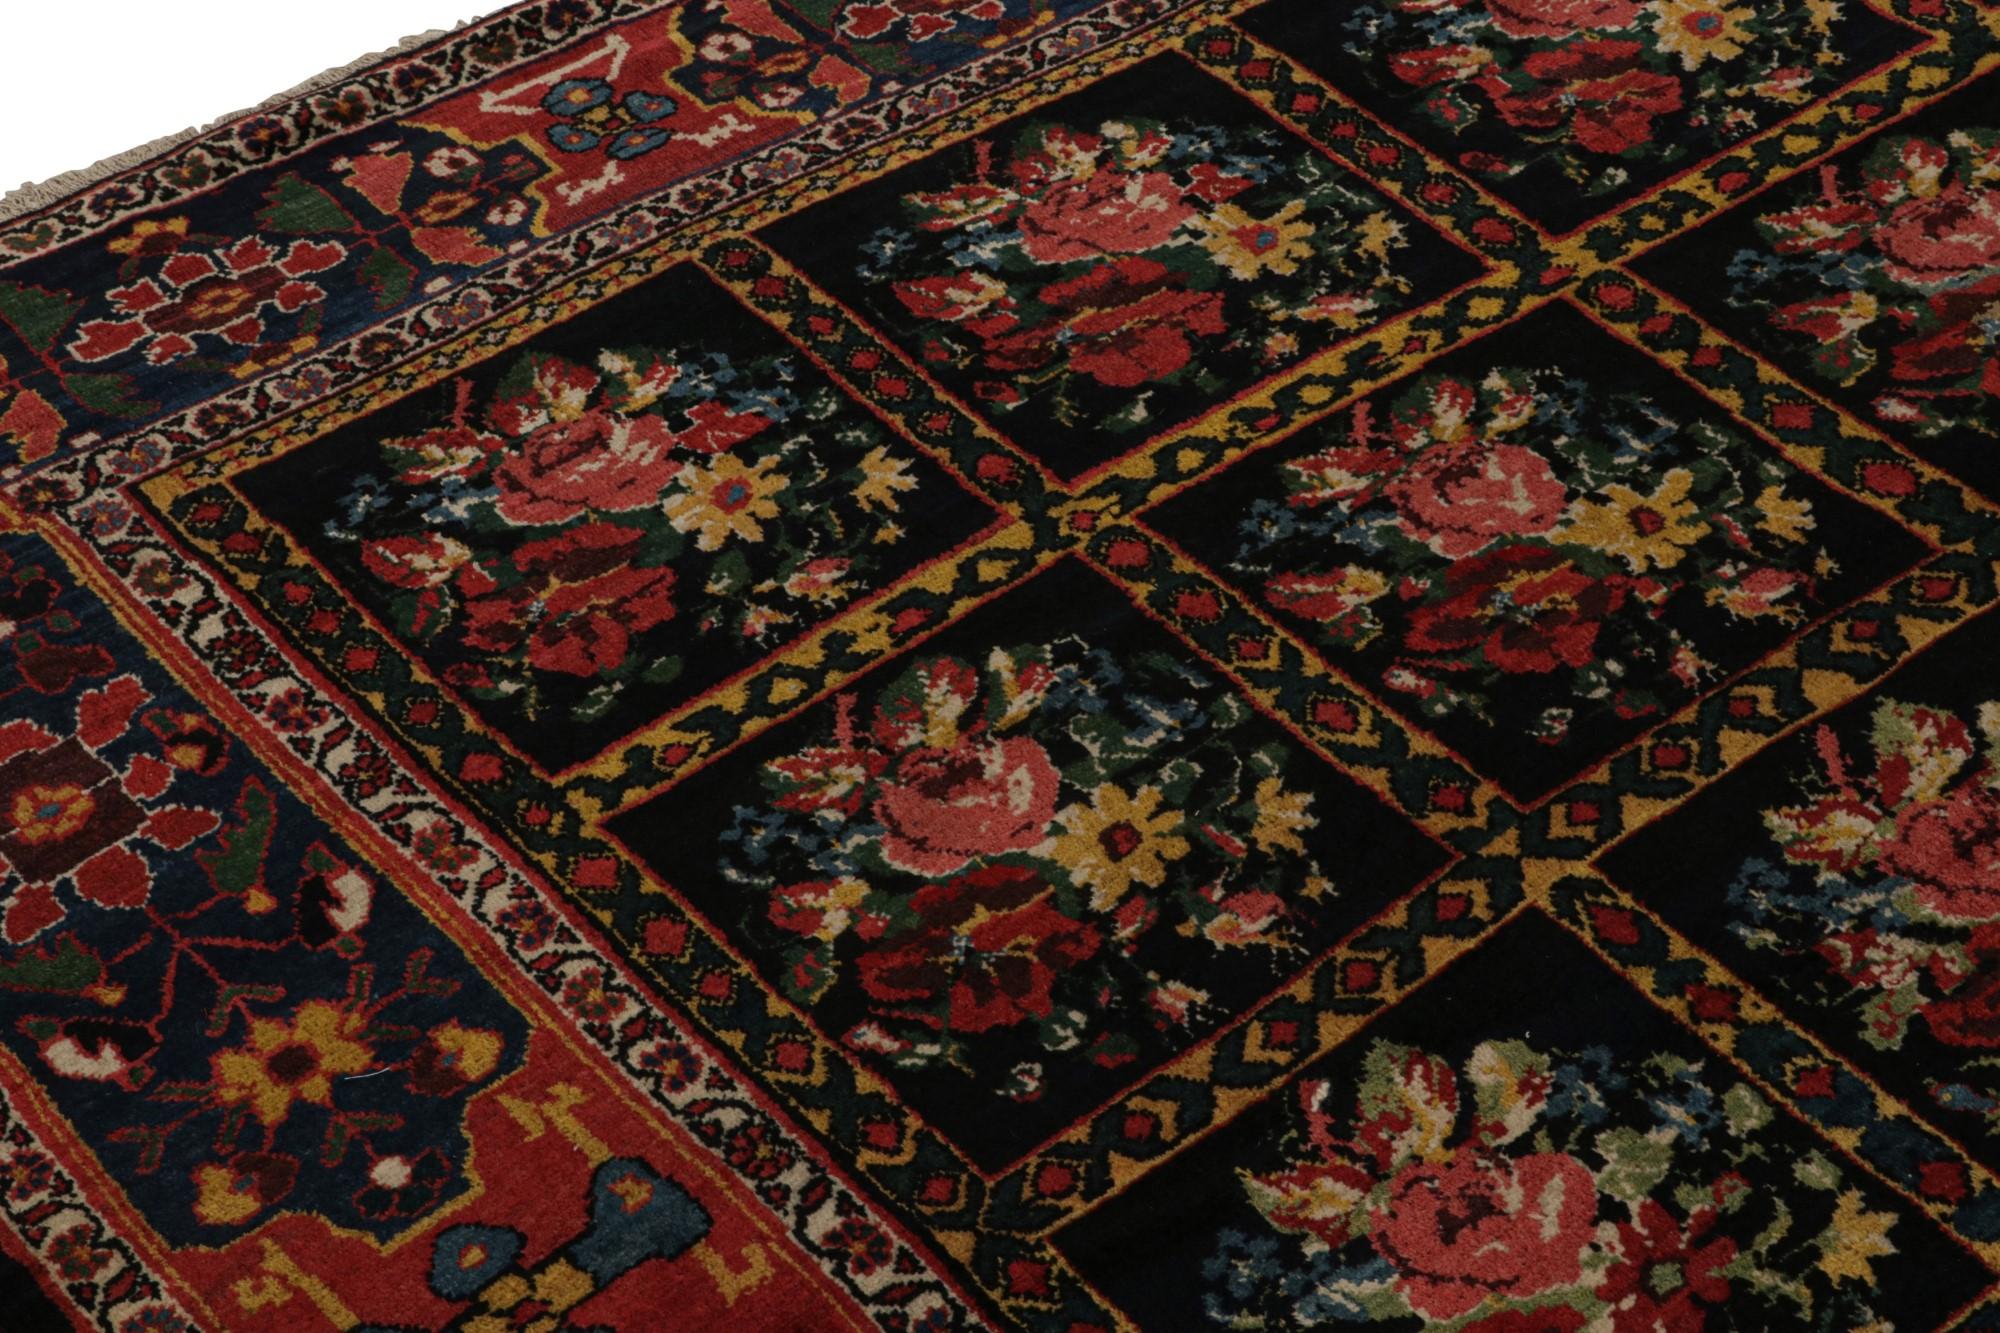 Antique Persian Bakhtiari Rug with Black, Red and Blue Florals In Good Condition For Sale In Long Island City, NY